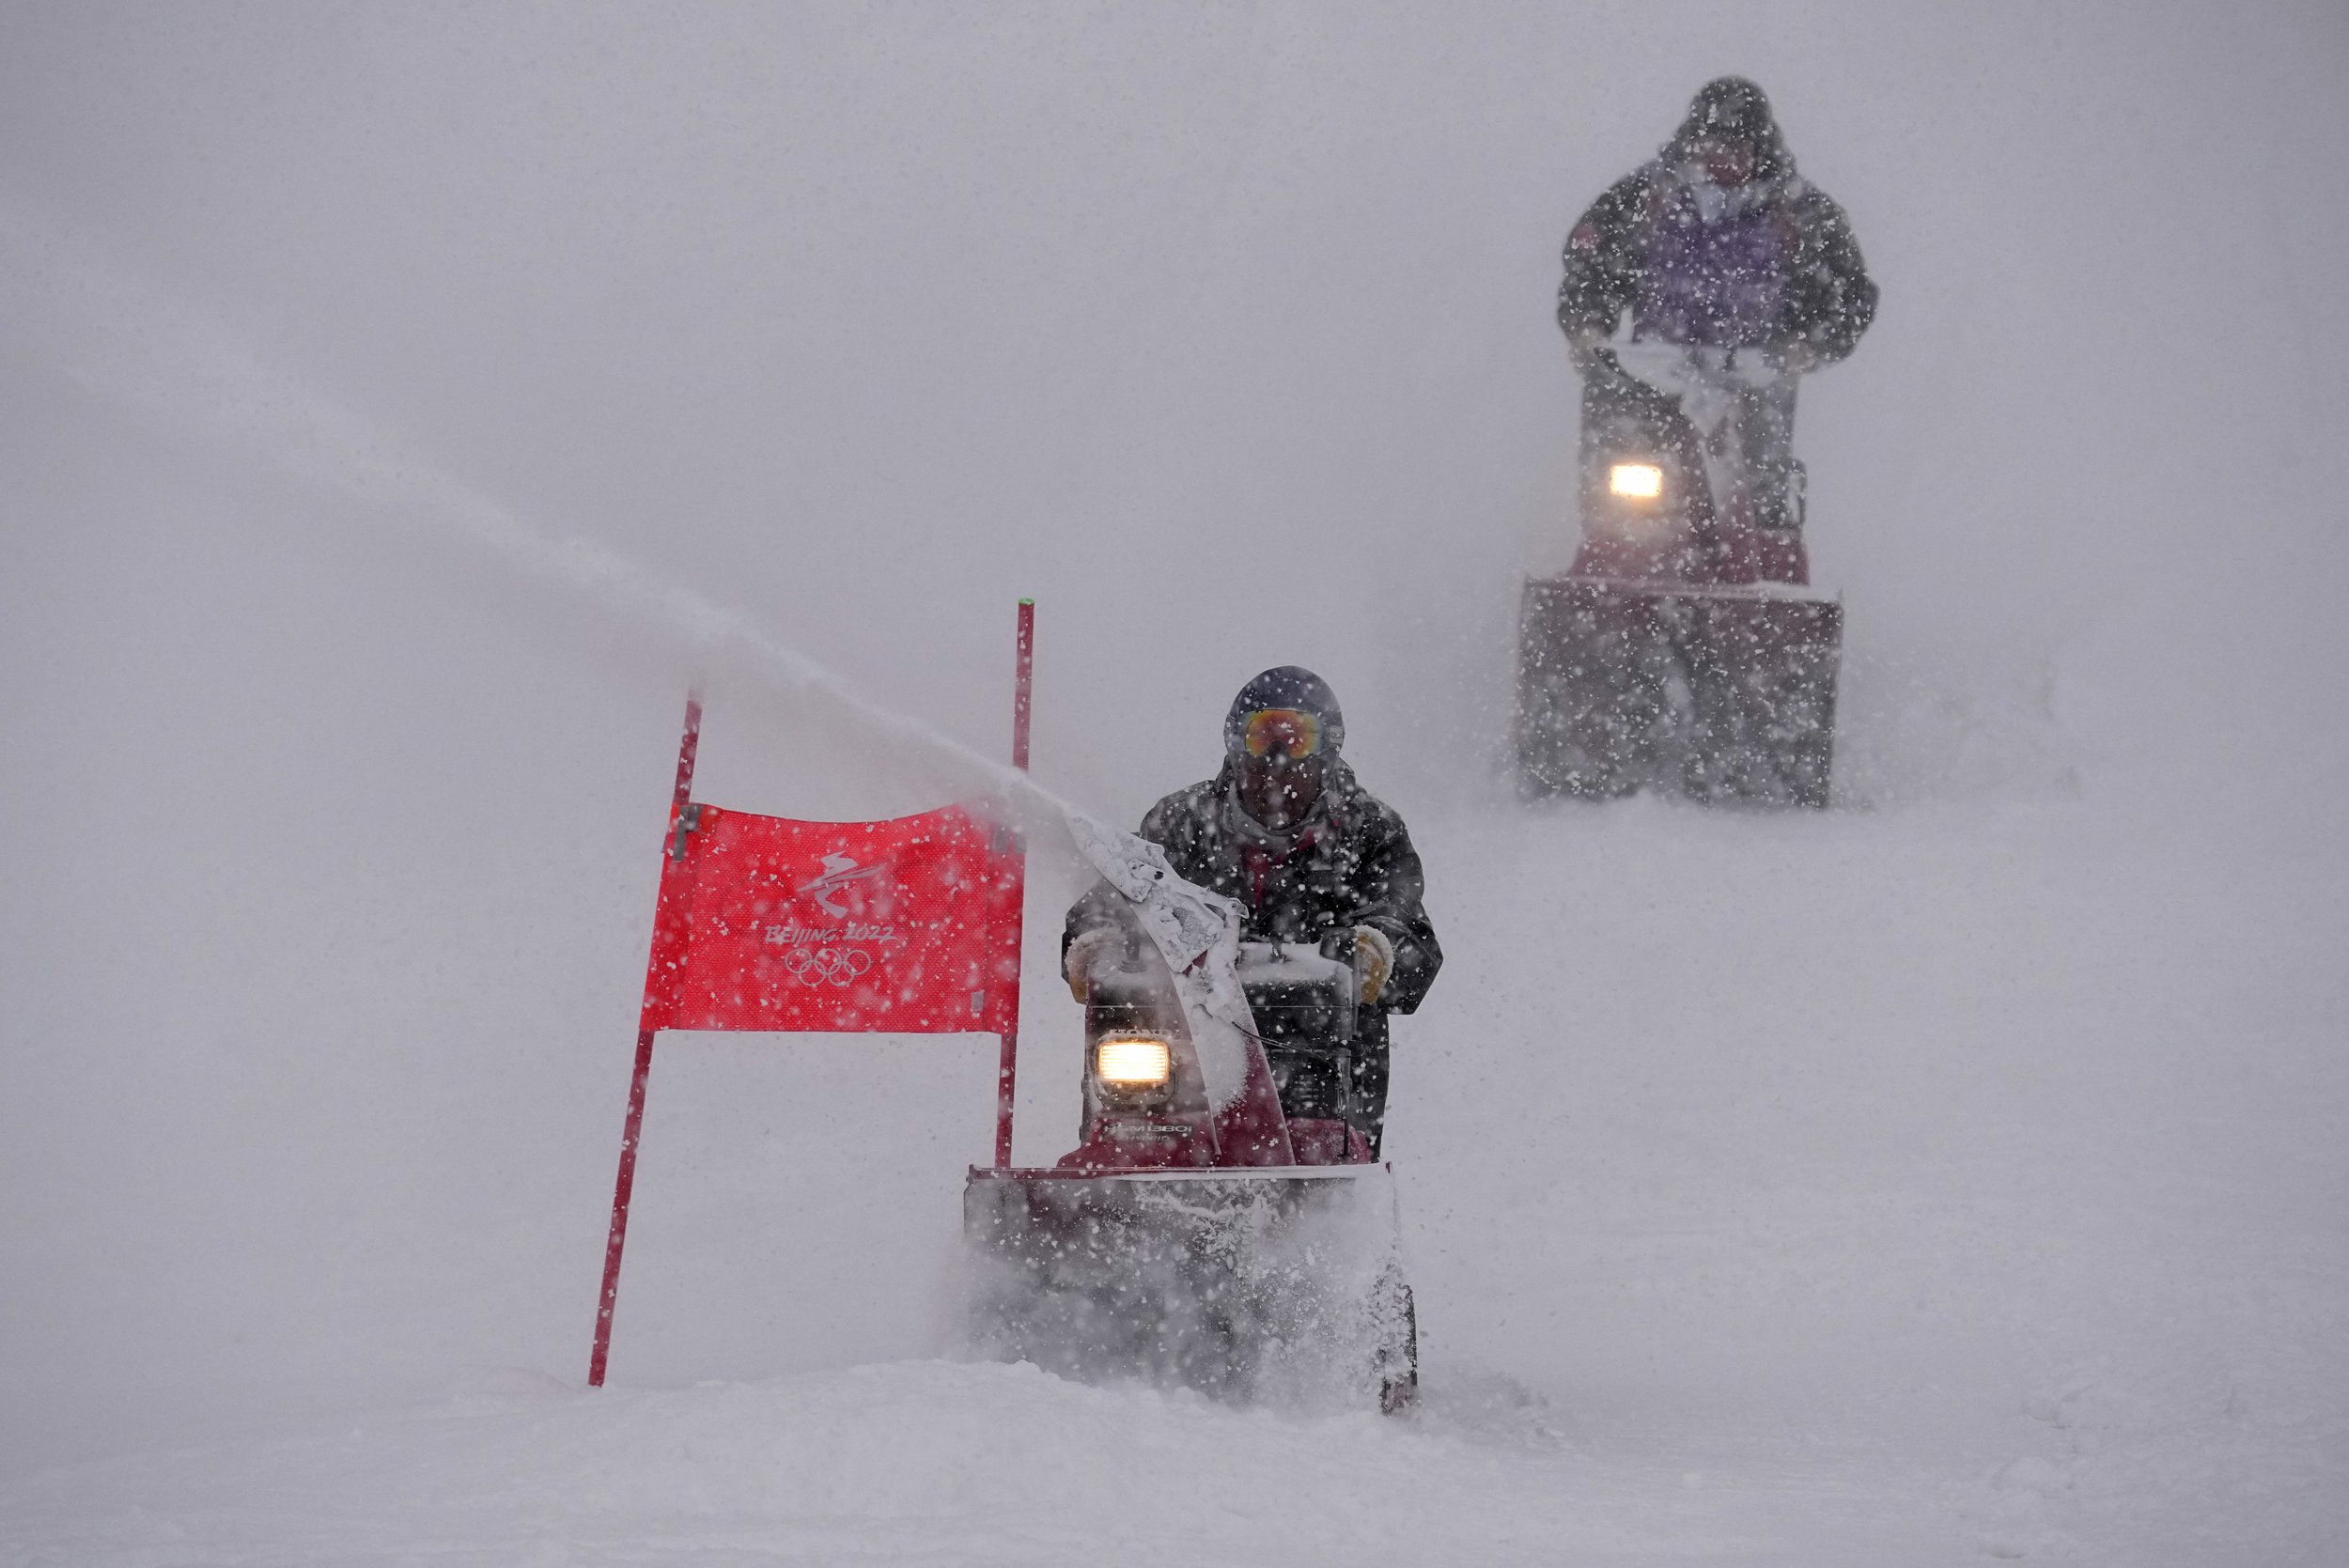  Course workers blow snow from the men's giant slalom course as the snow comes down at the alpine ski venue at the 2022 Winter Olympics, Sunday, Feb. 13, 2022, in the Yanqing district of Beijing. (AP Photo/Robert F. Bukaty) 